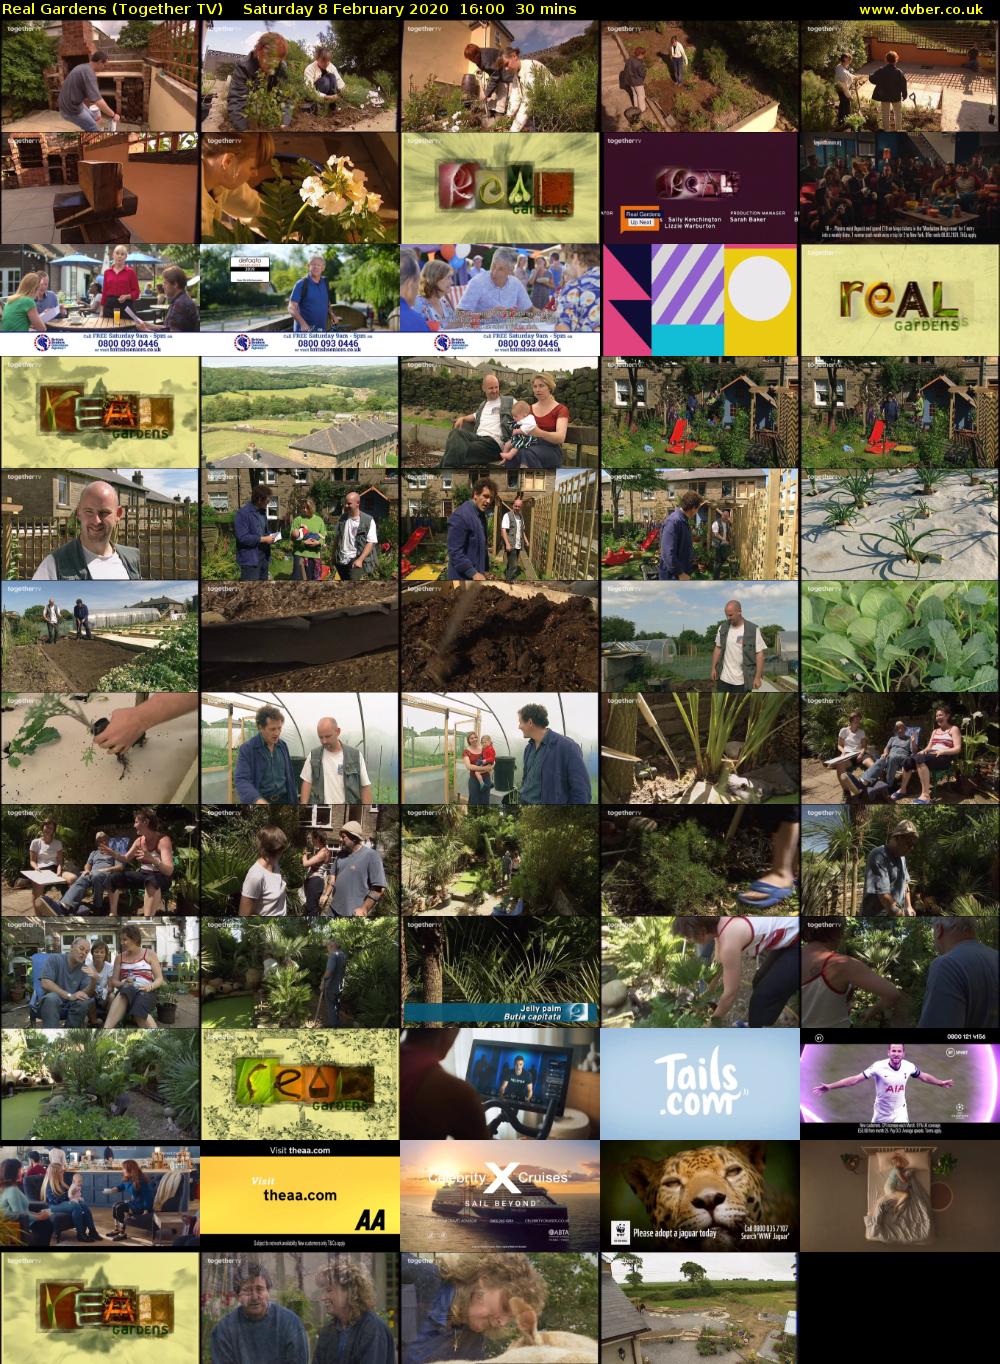 Real Gardens (Together TV) Saturday 8 February 2020 16:00 - 16:30